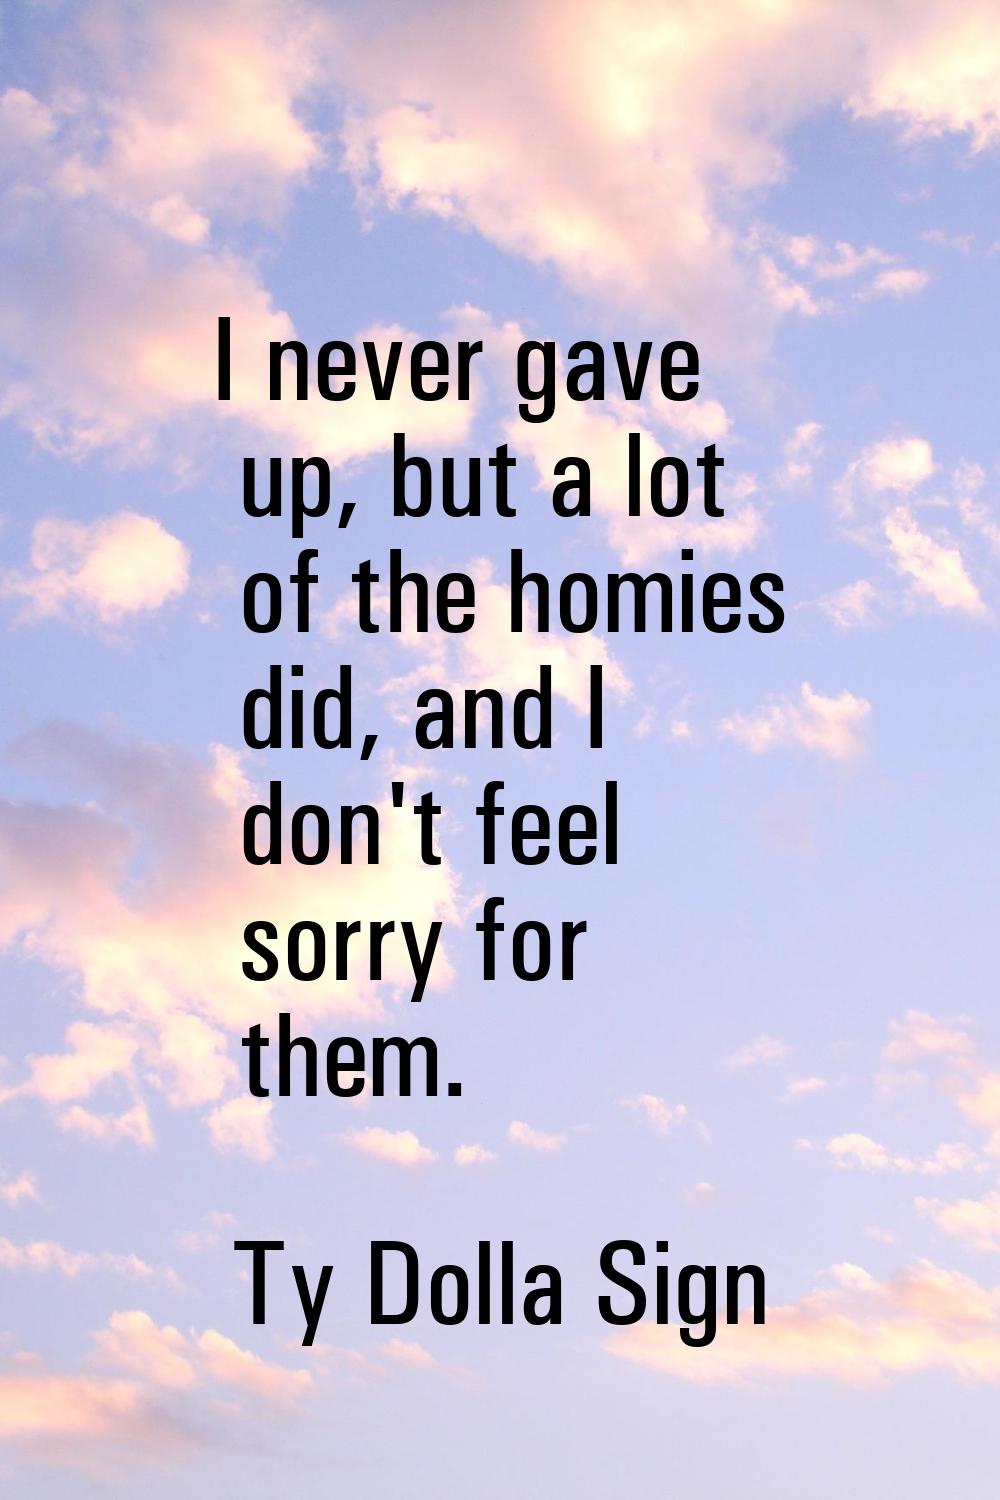 I never gave up, but a lot of the homies did, and I don't feel sorry for them.